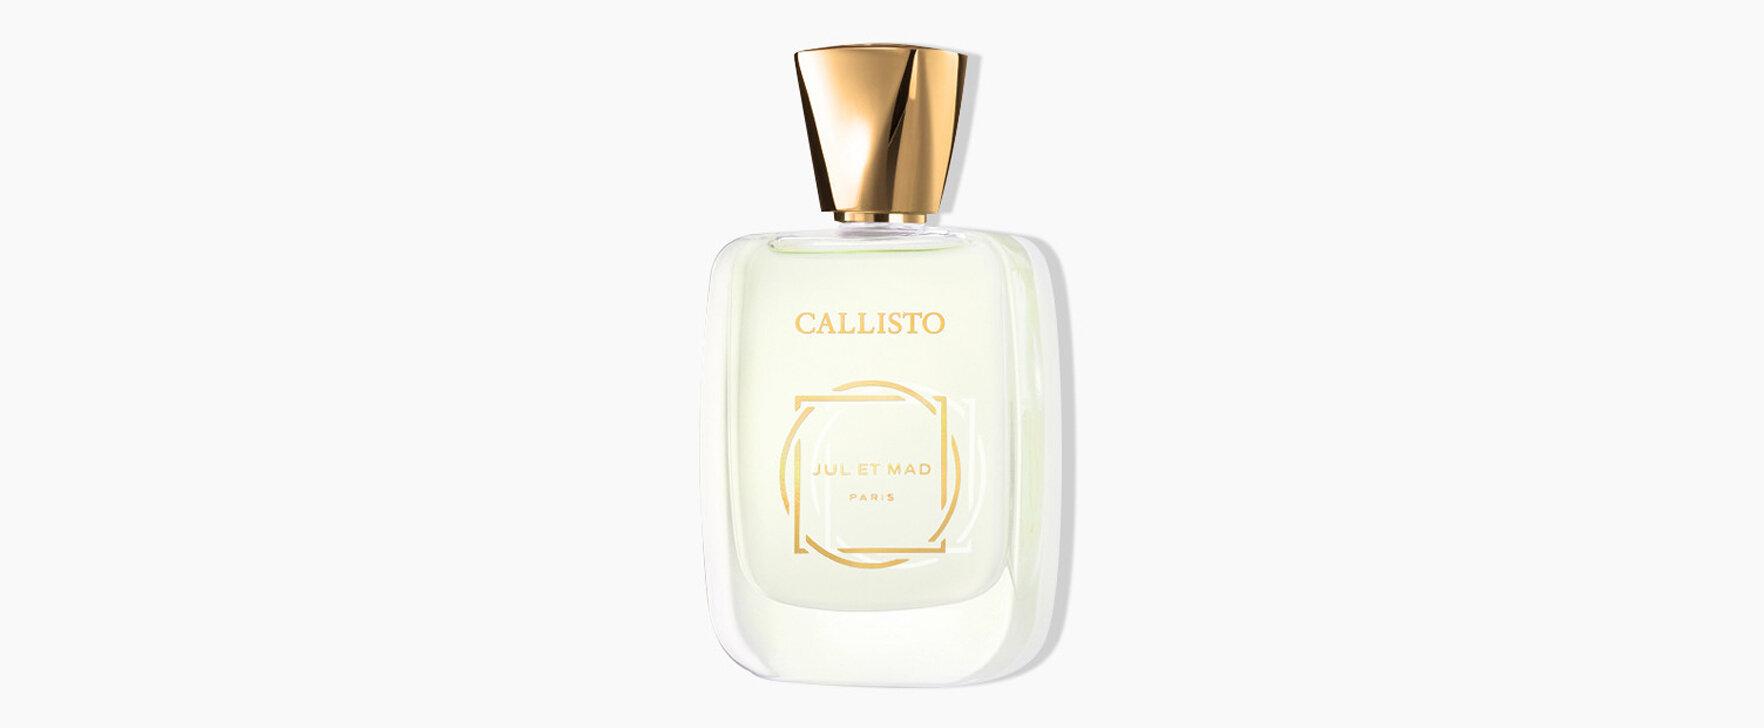 An Ode to the Cosmos: The New Extrait de Parfum "Callisto" by Jul et Mad